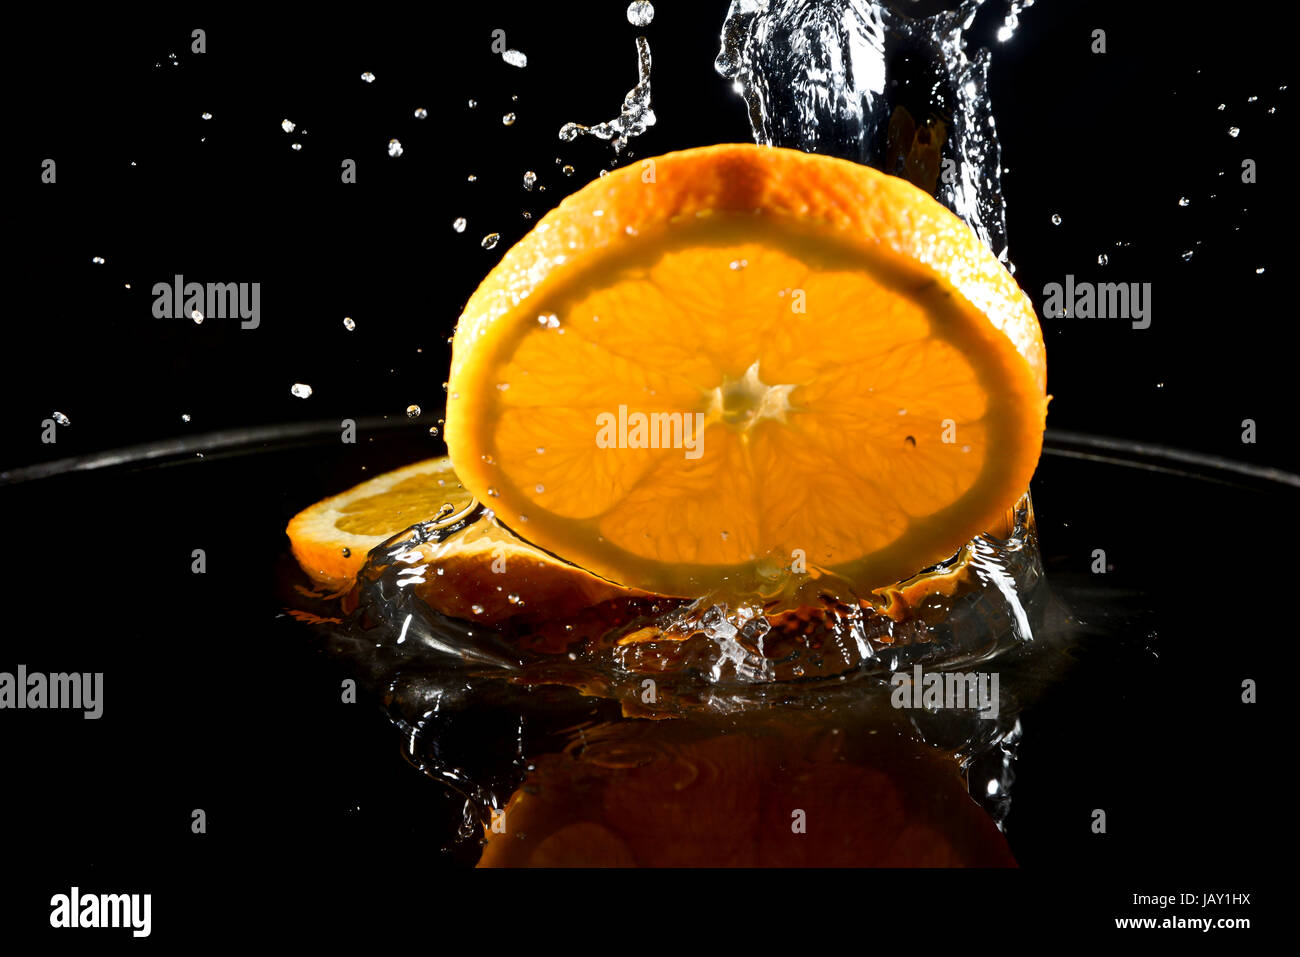 citrus fruit falling in water drops splashing everywhere. Concept of freshness and purity. Stock Photo